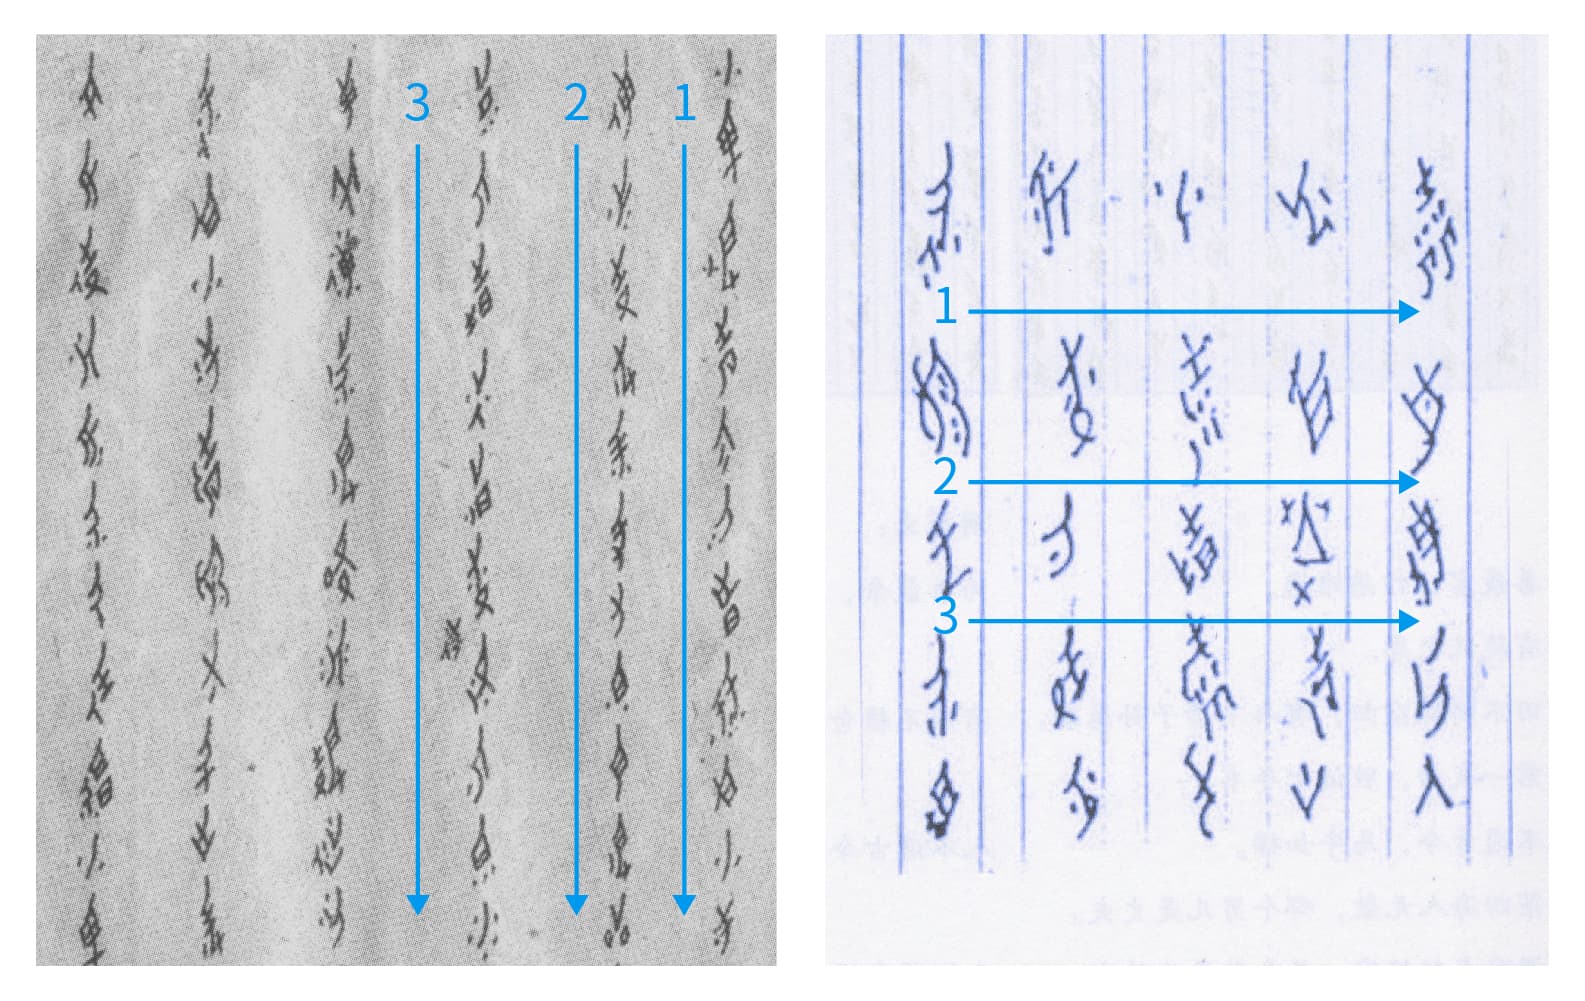 Nüshu's possible writing directions: from top to bottom or from left to right